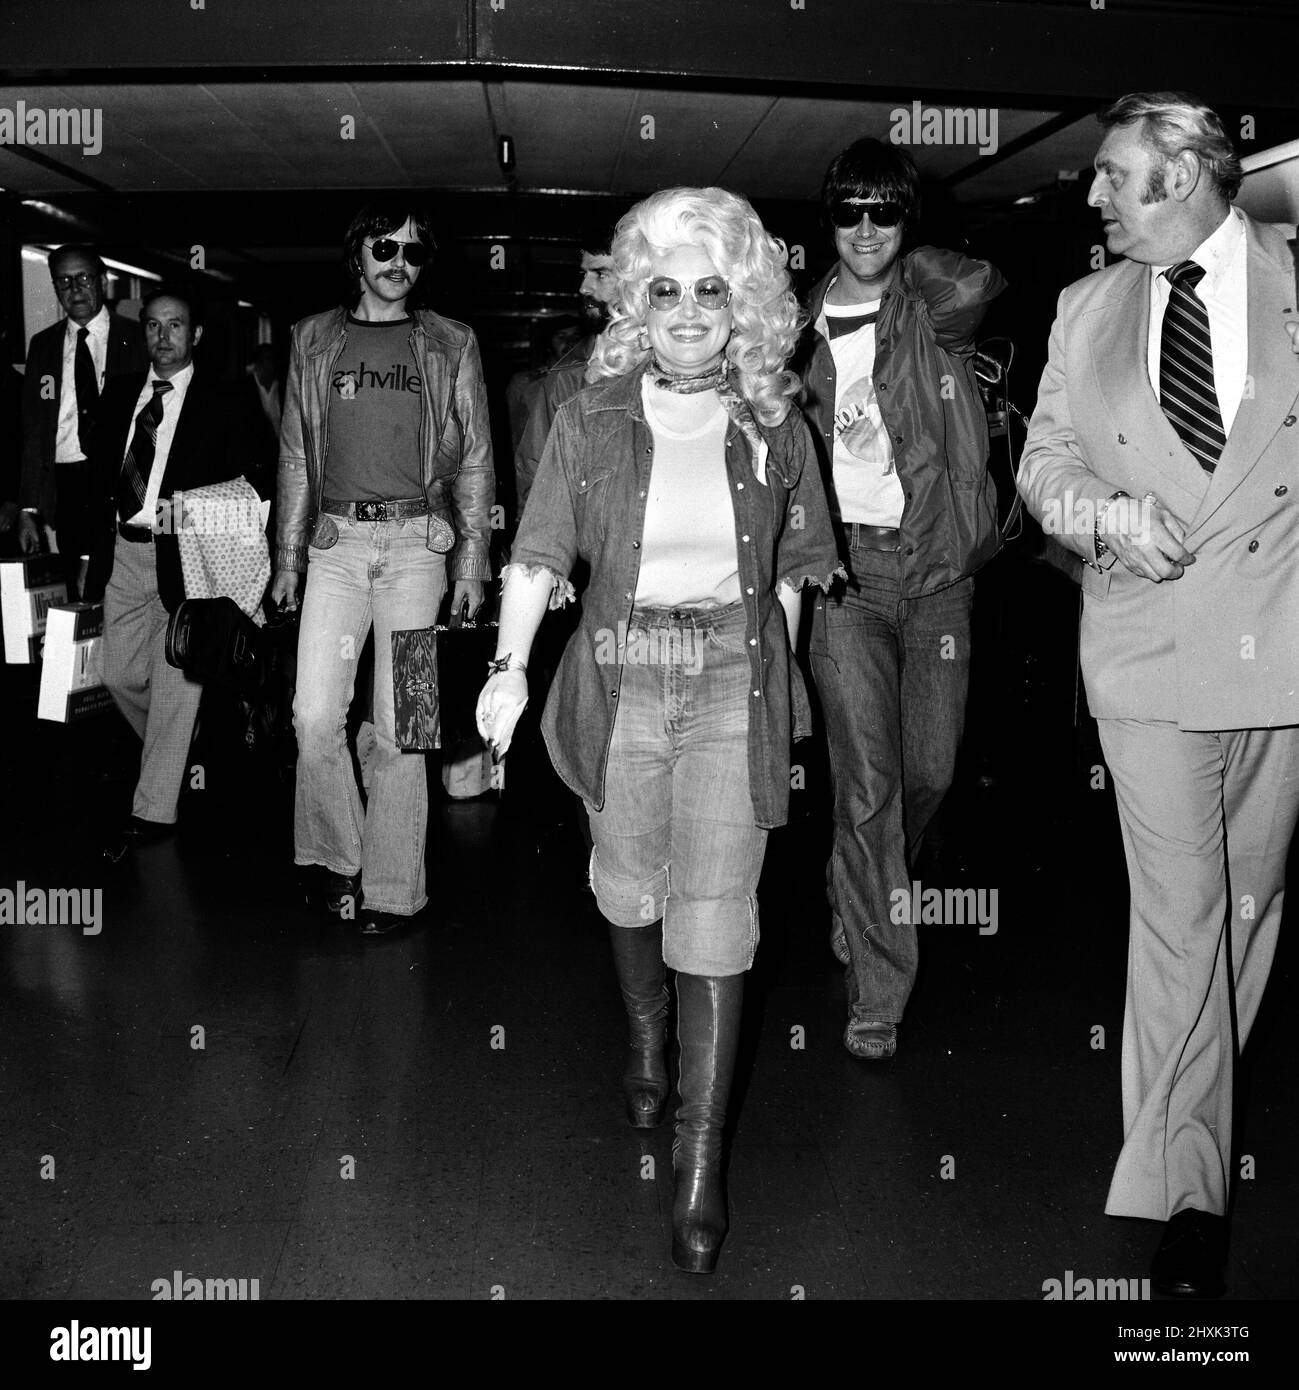 Country & Western singer Dolly Parton arriving at London Heathrow Airport, 16th May 1977. Stock Photo